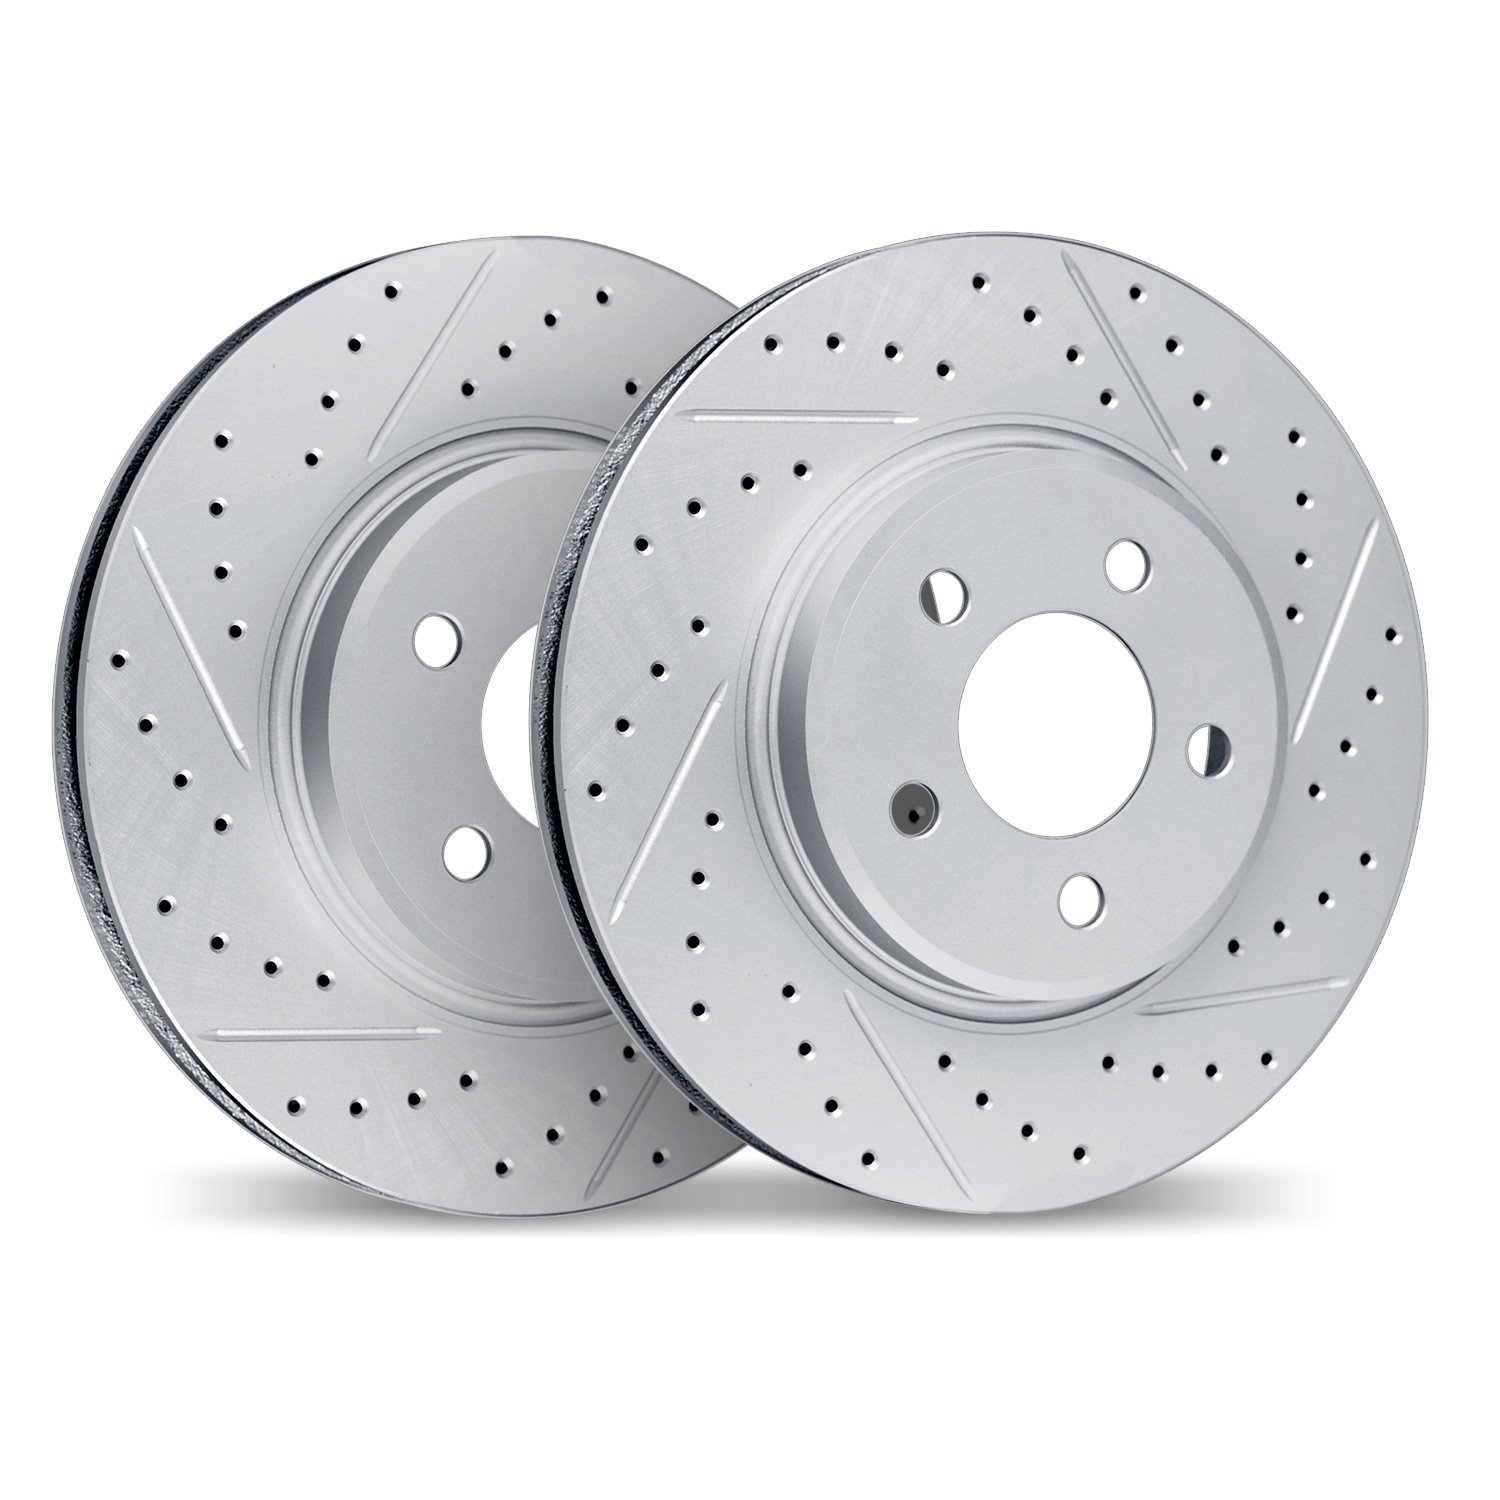 2002-31029 Geoperformance Drilled/Slotted Brake Rotors, Fits Select BMW, Position: Front